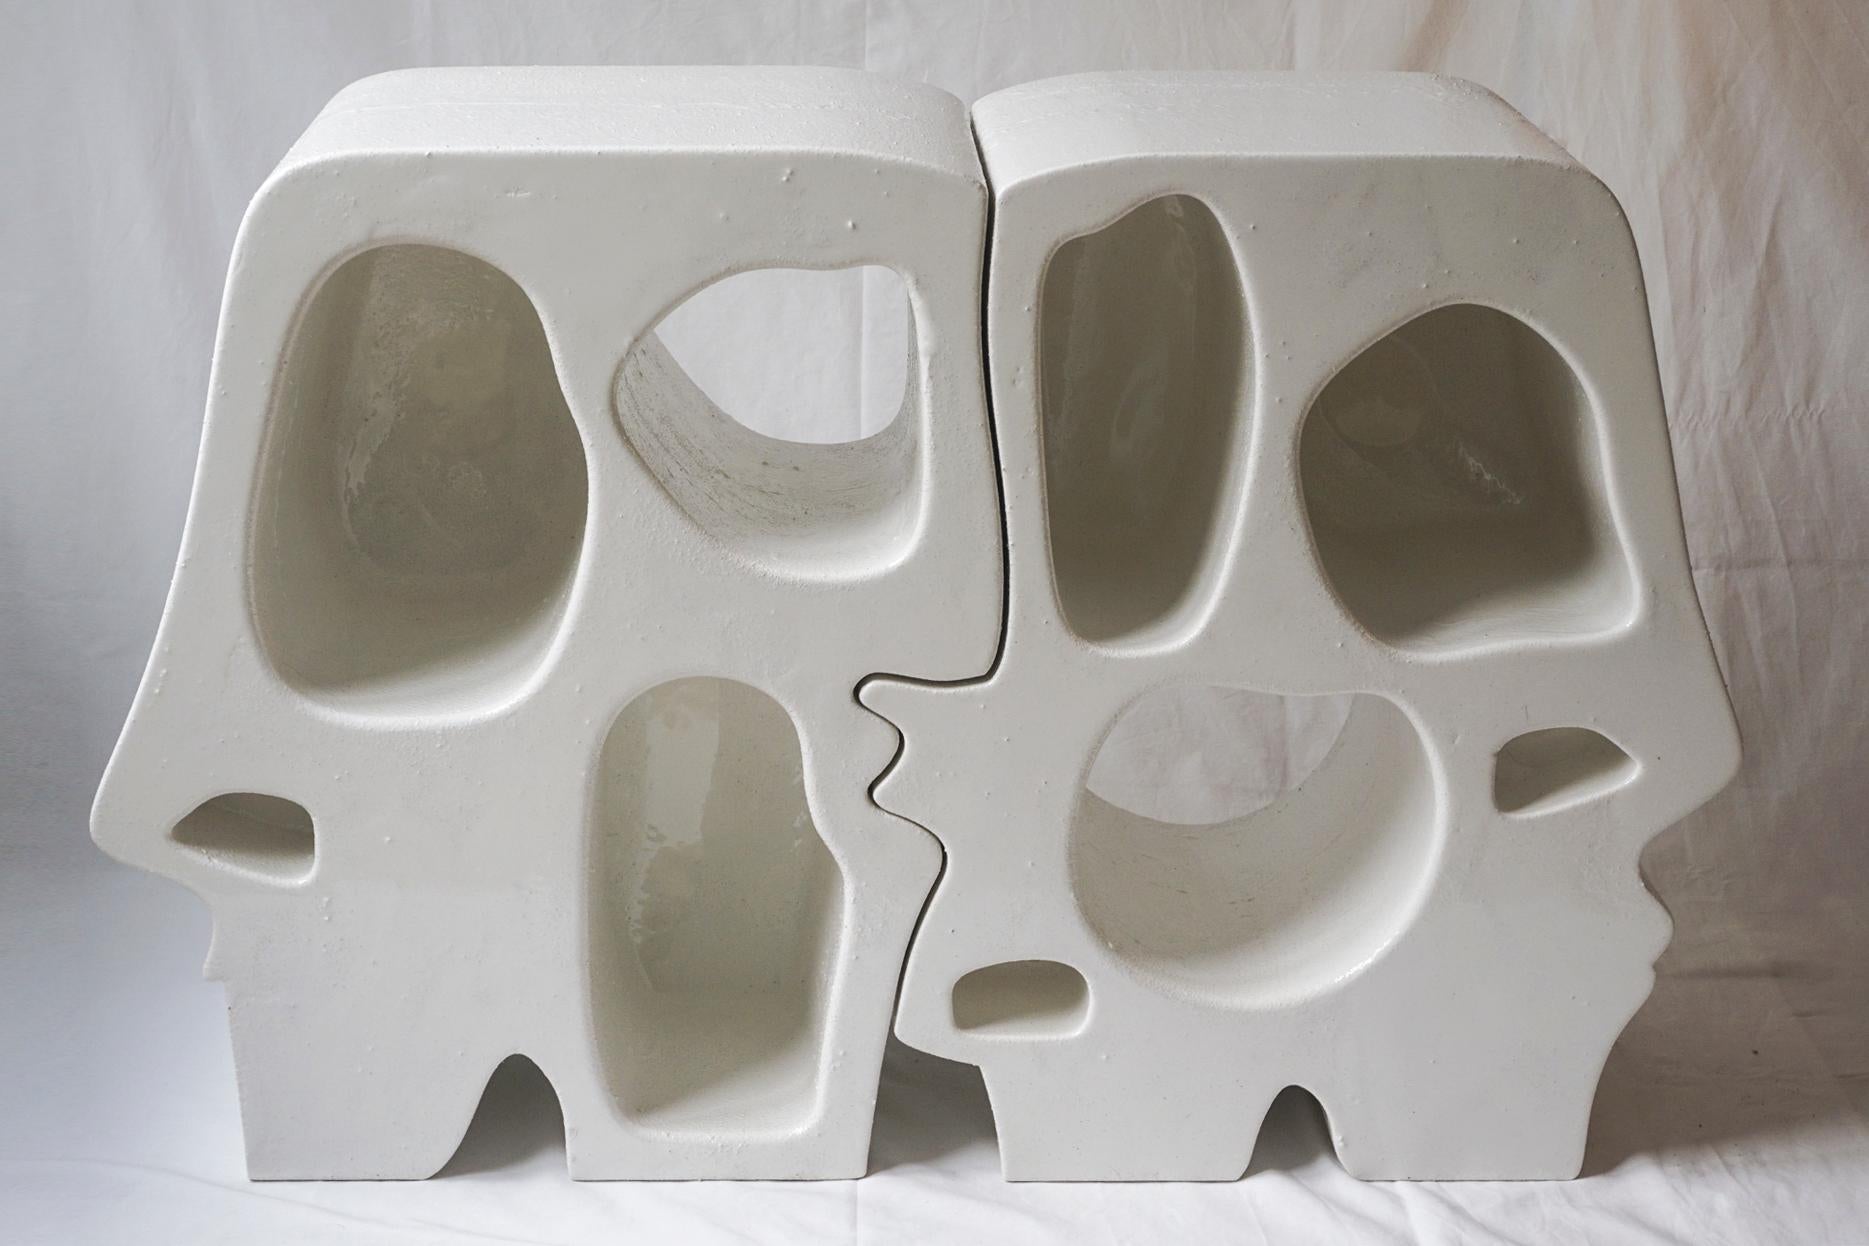 Spectator twins by Freia Achenbach
Limited Edition of 25
Dimensions: D 105 x W 33 cm x H 68 cm
Materials: resin, sand, foam

The amorphly shaped shelf is not only offering storage or presentation space, but stimulates the mechanism of projection and